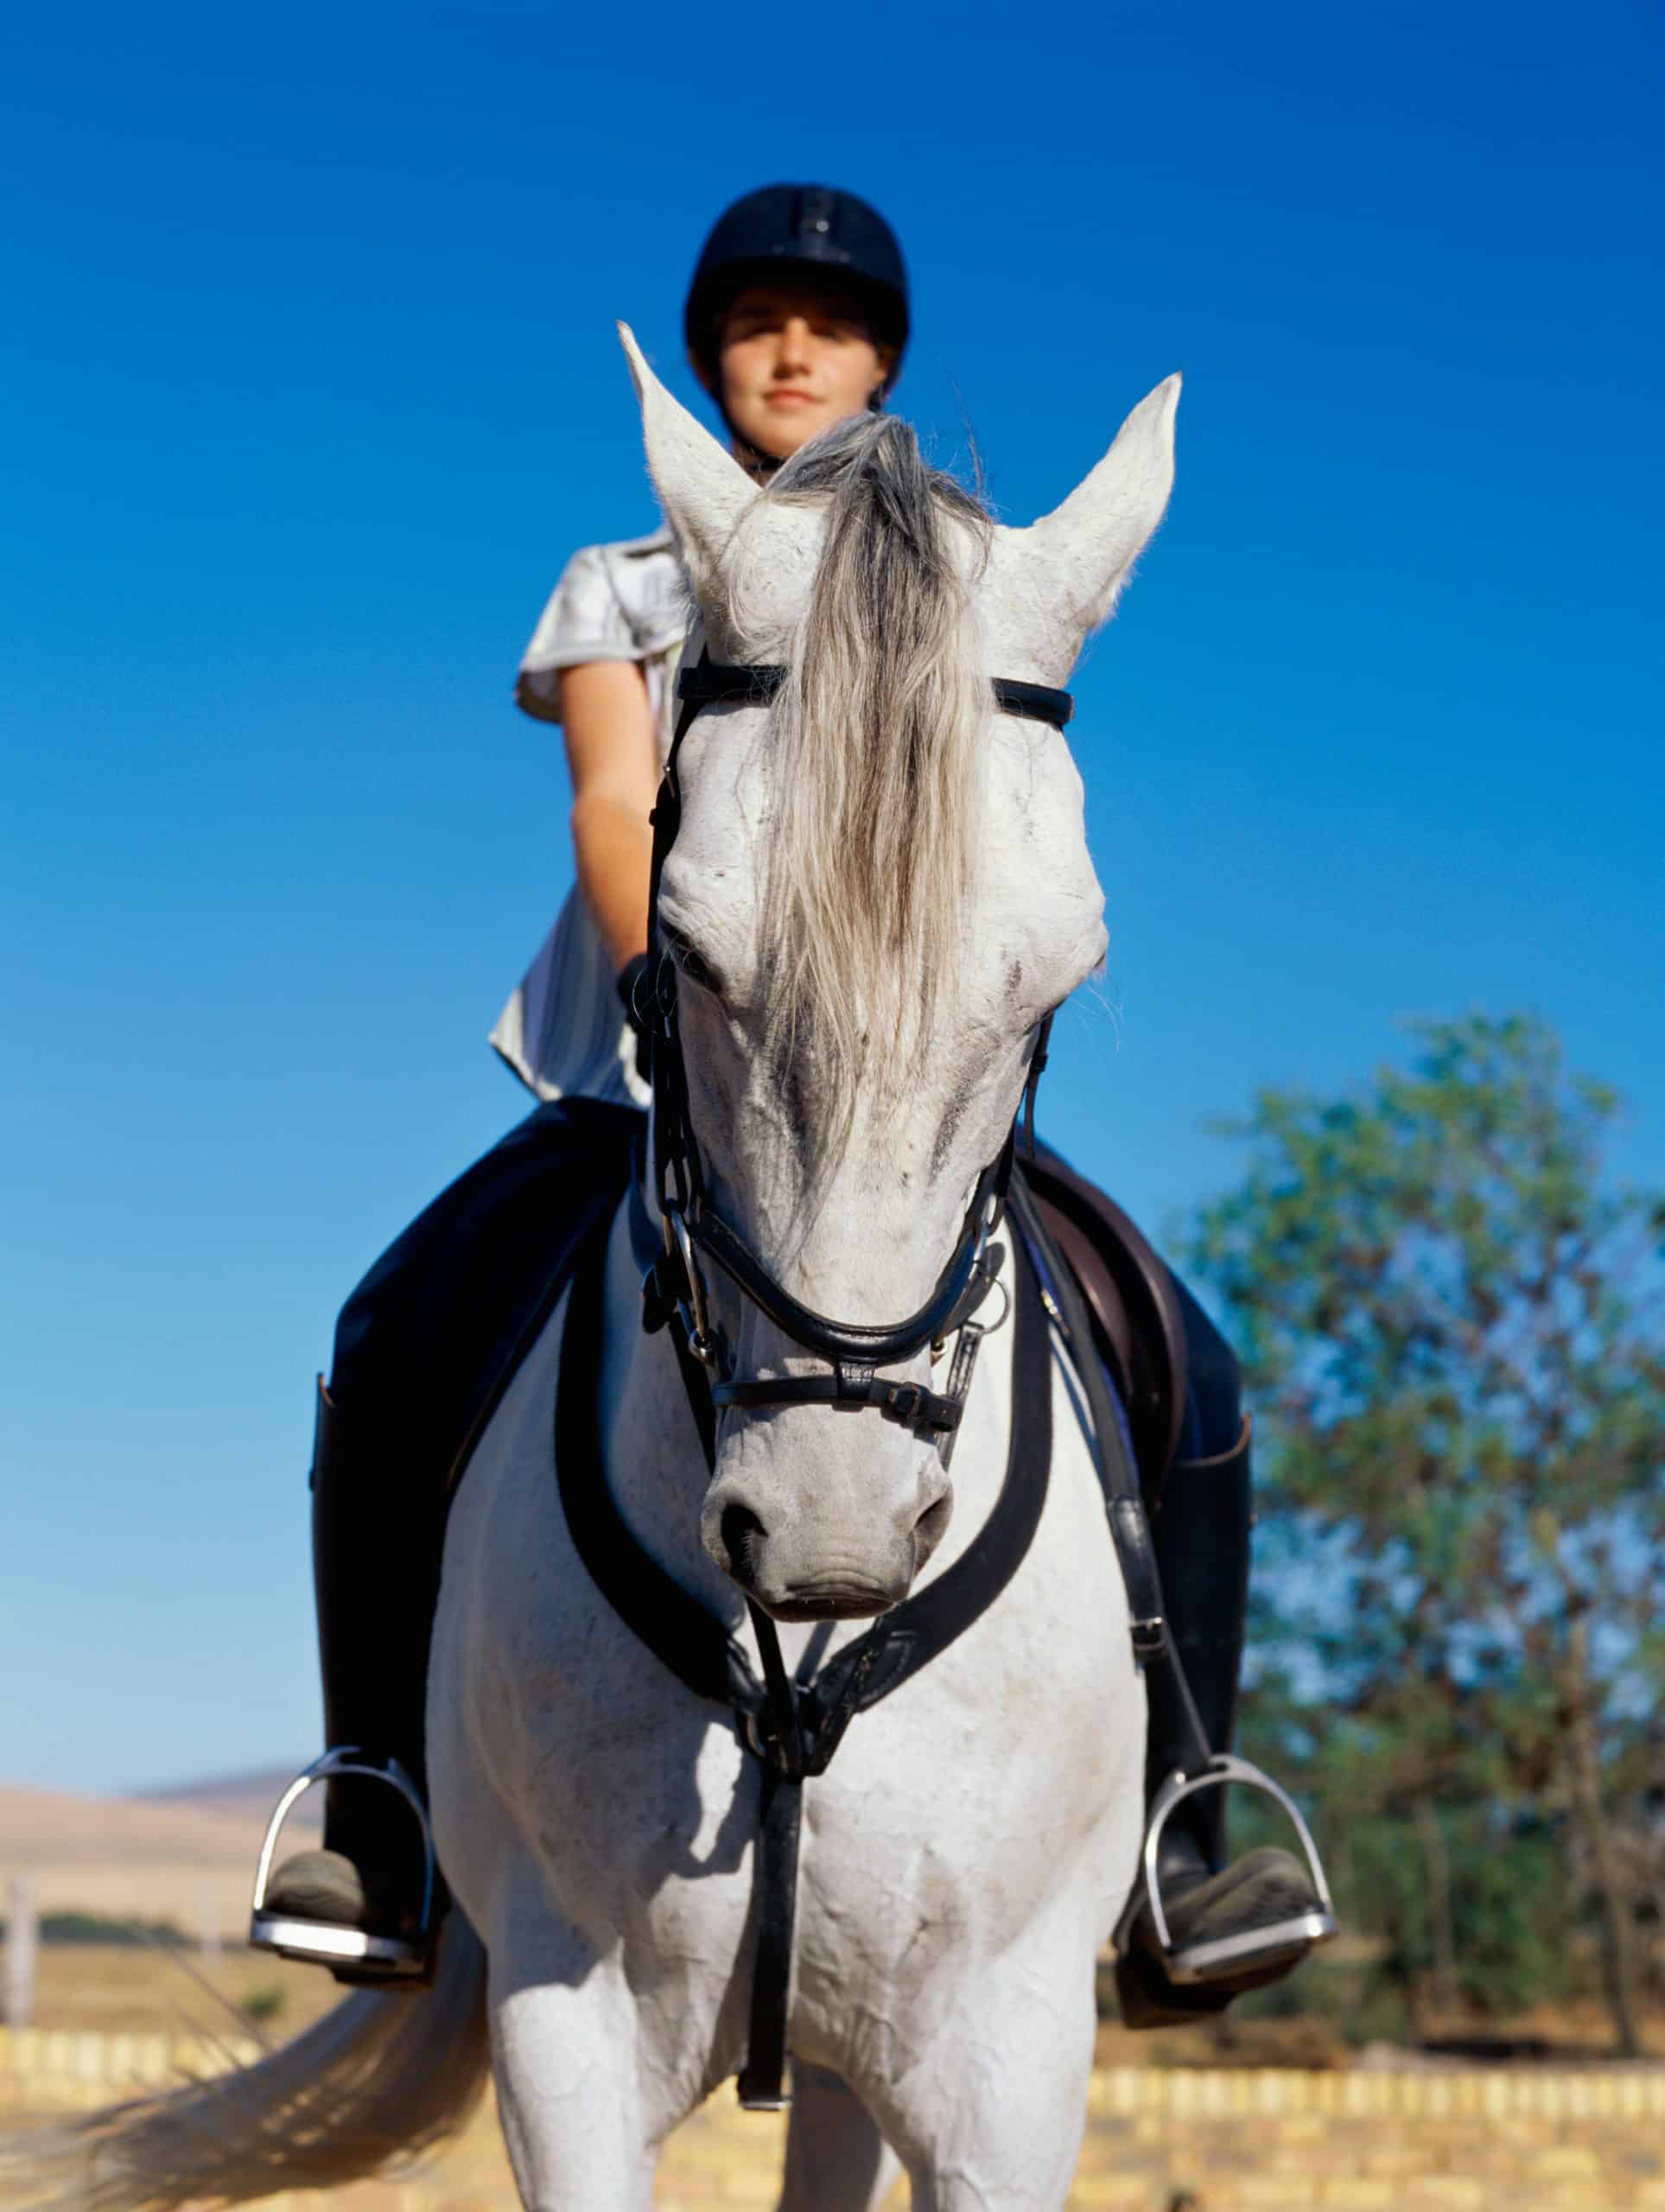 Low angle view of a girl riding a horse